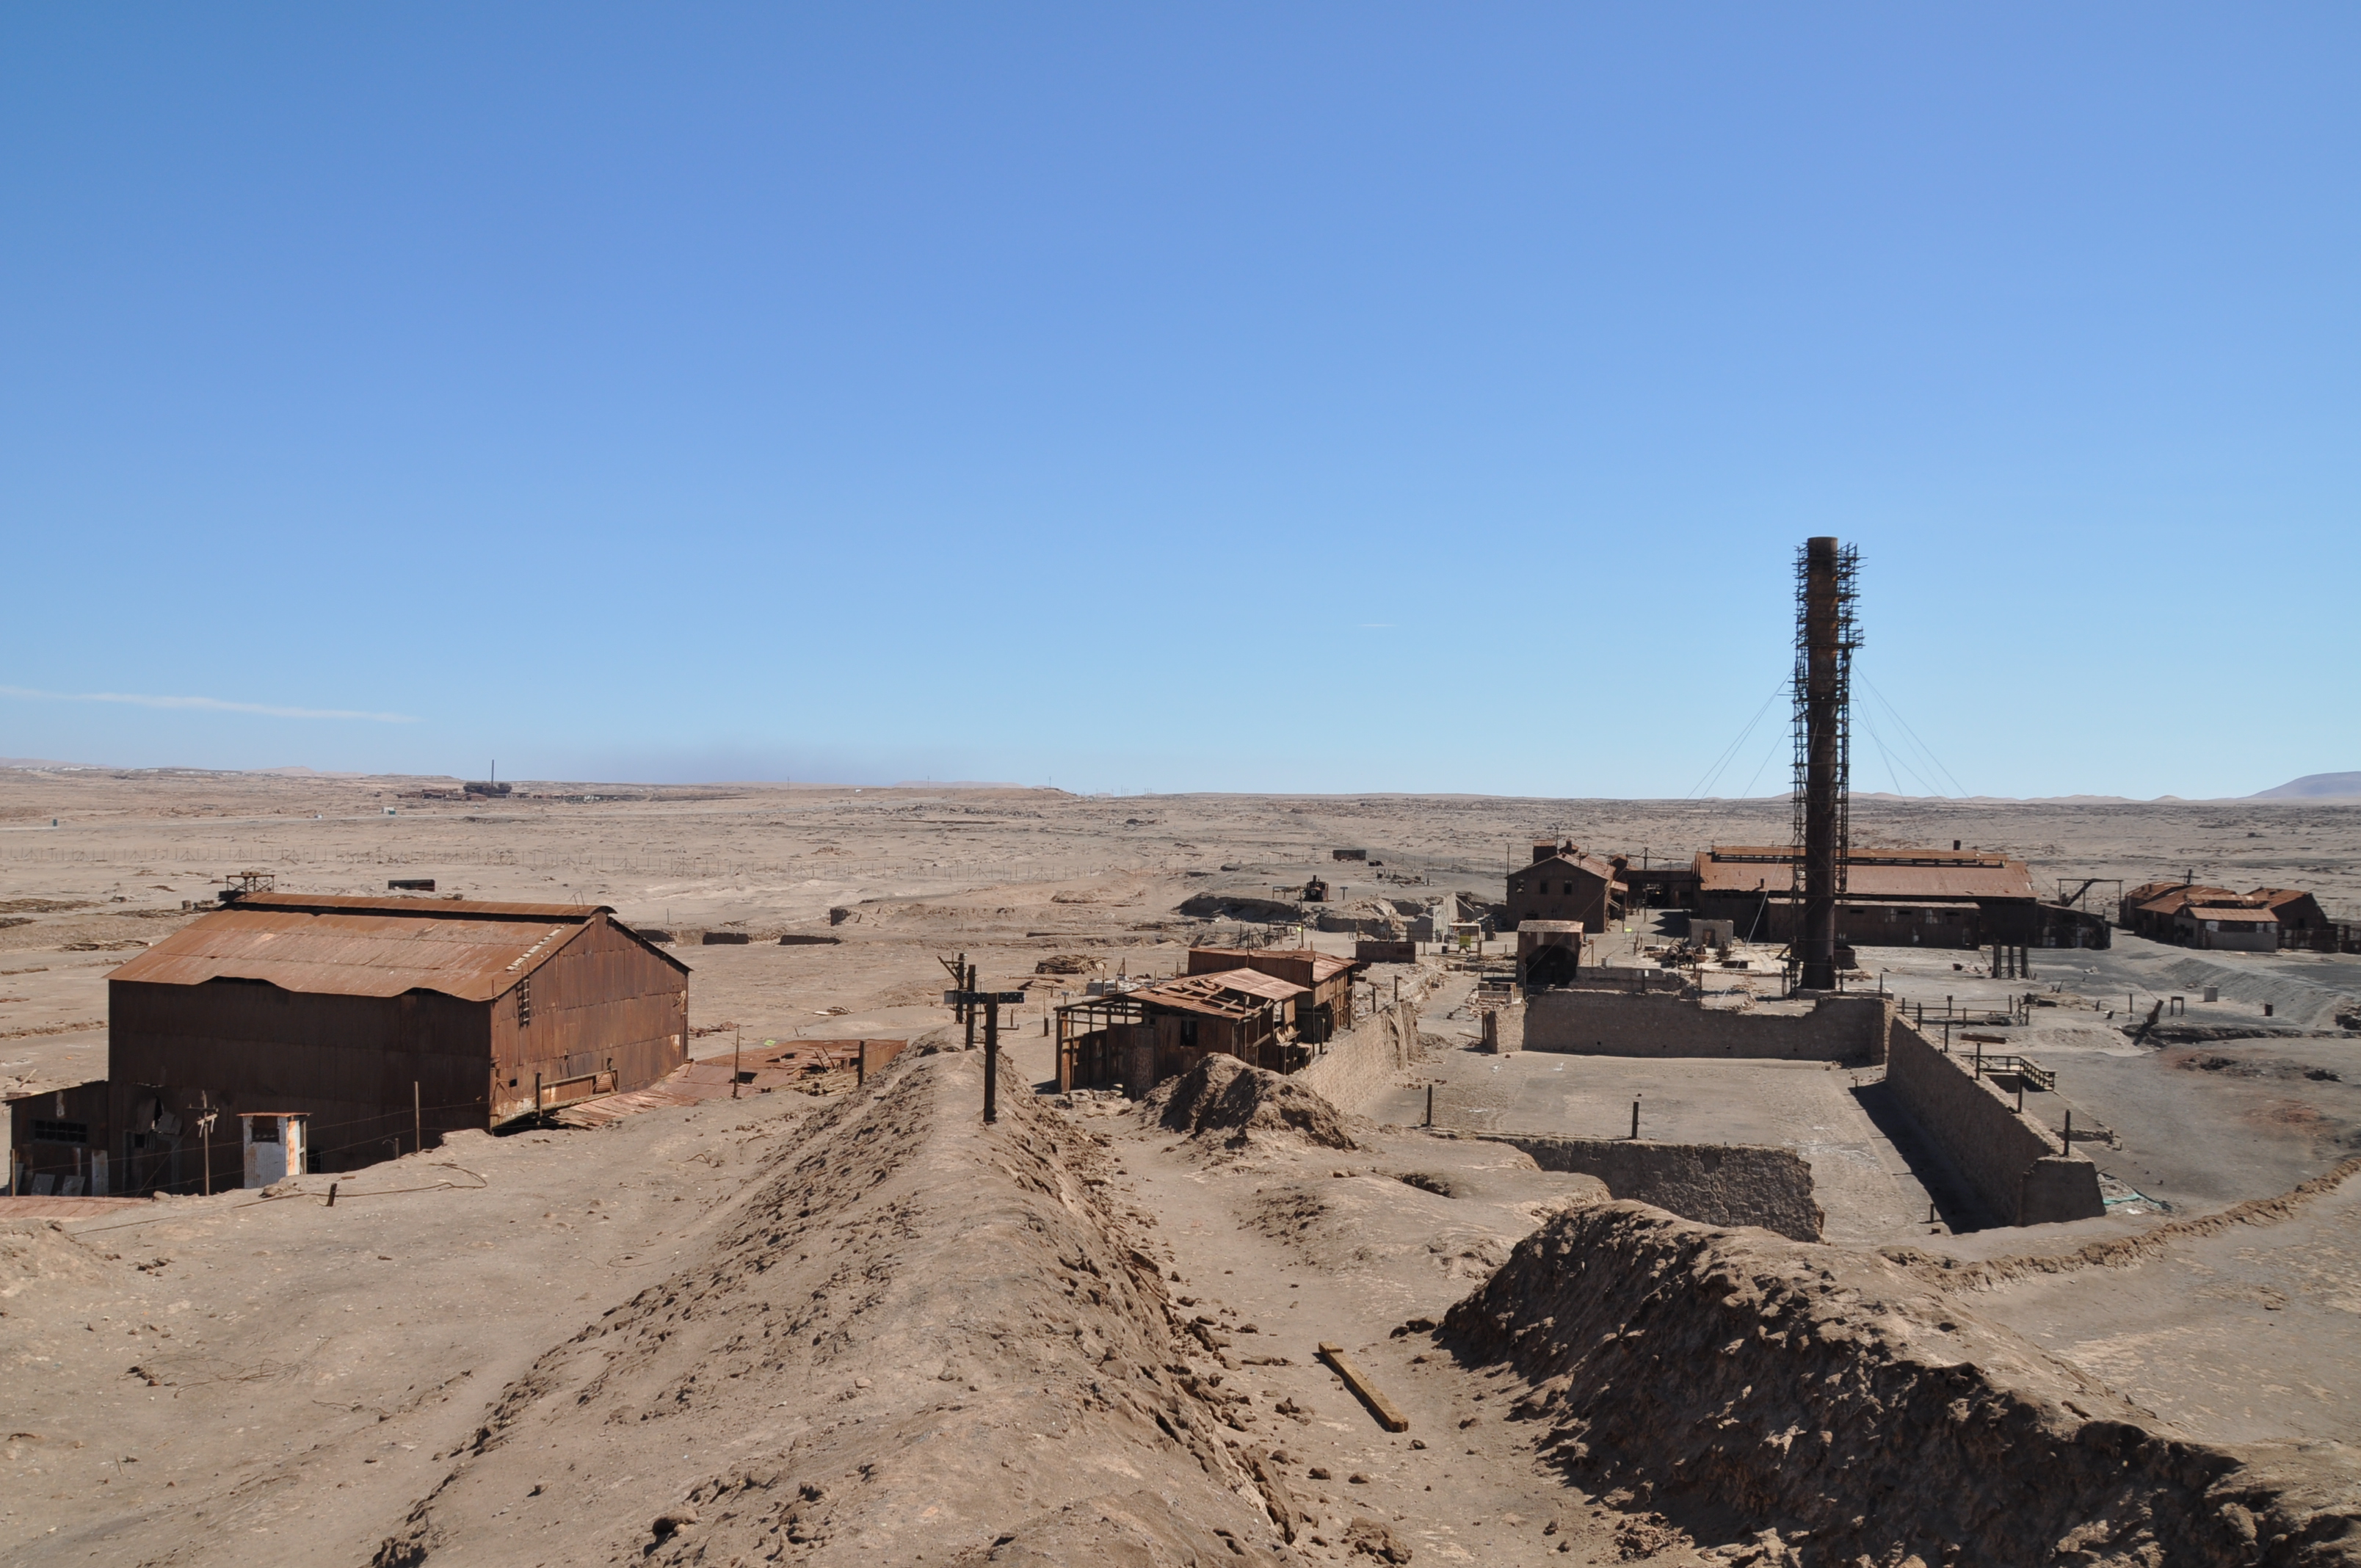 Humberstone: Electric Power Plant and Chimney